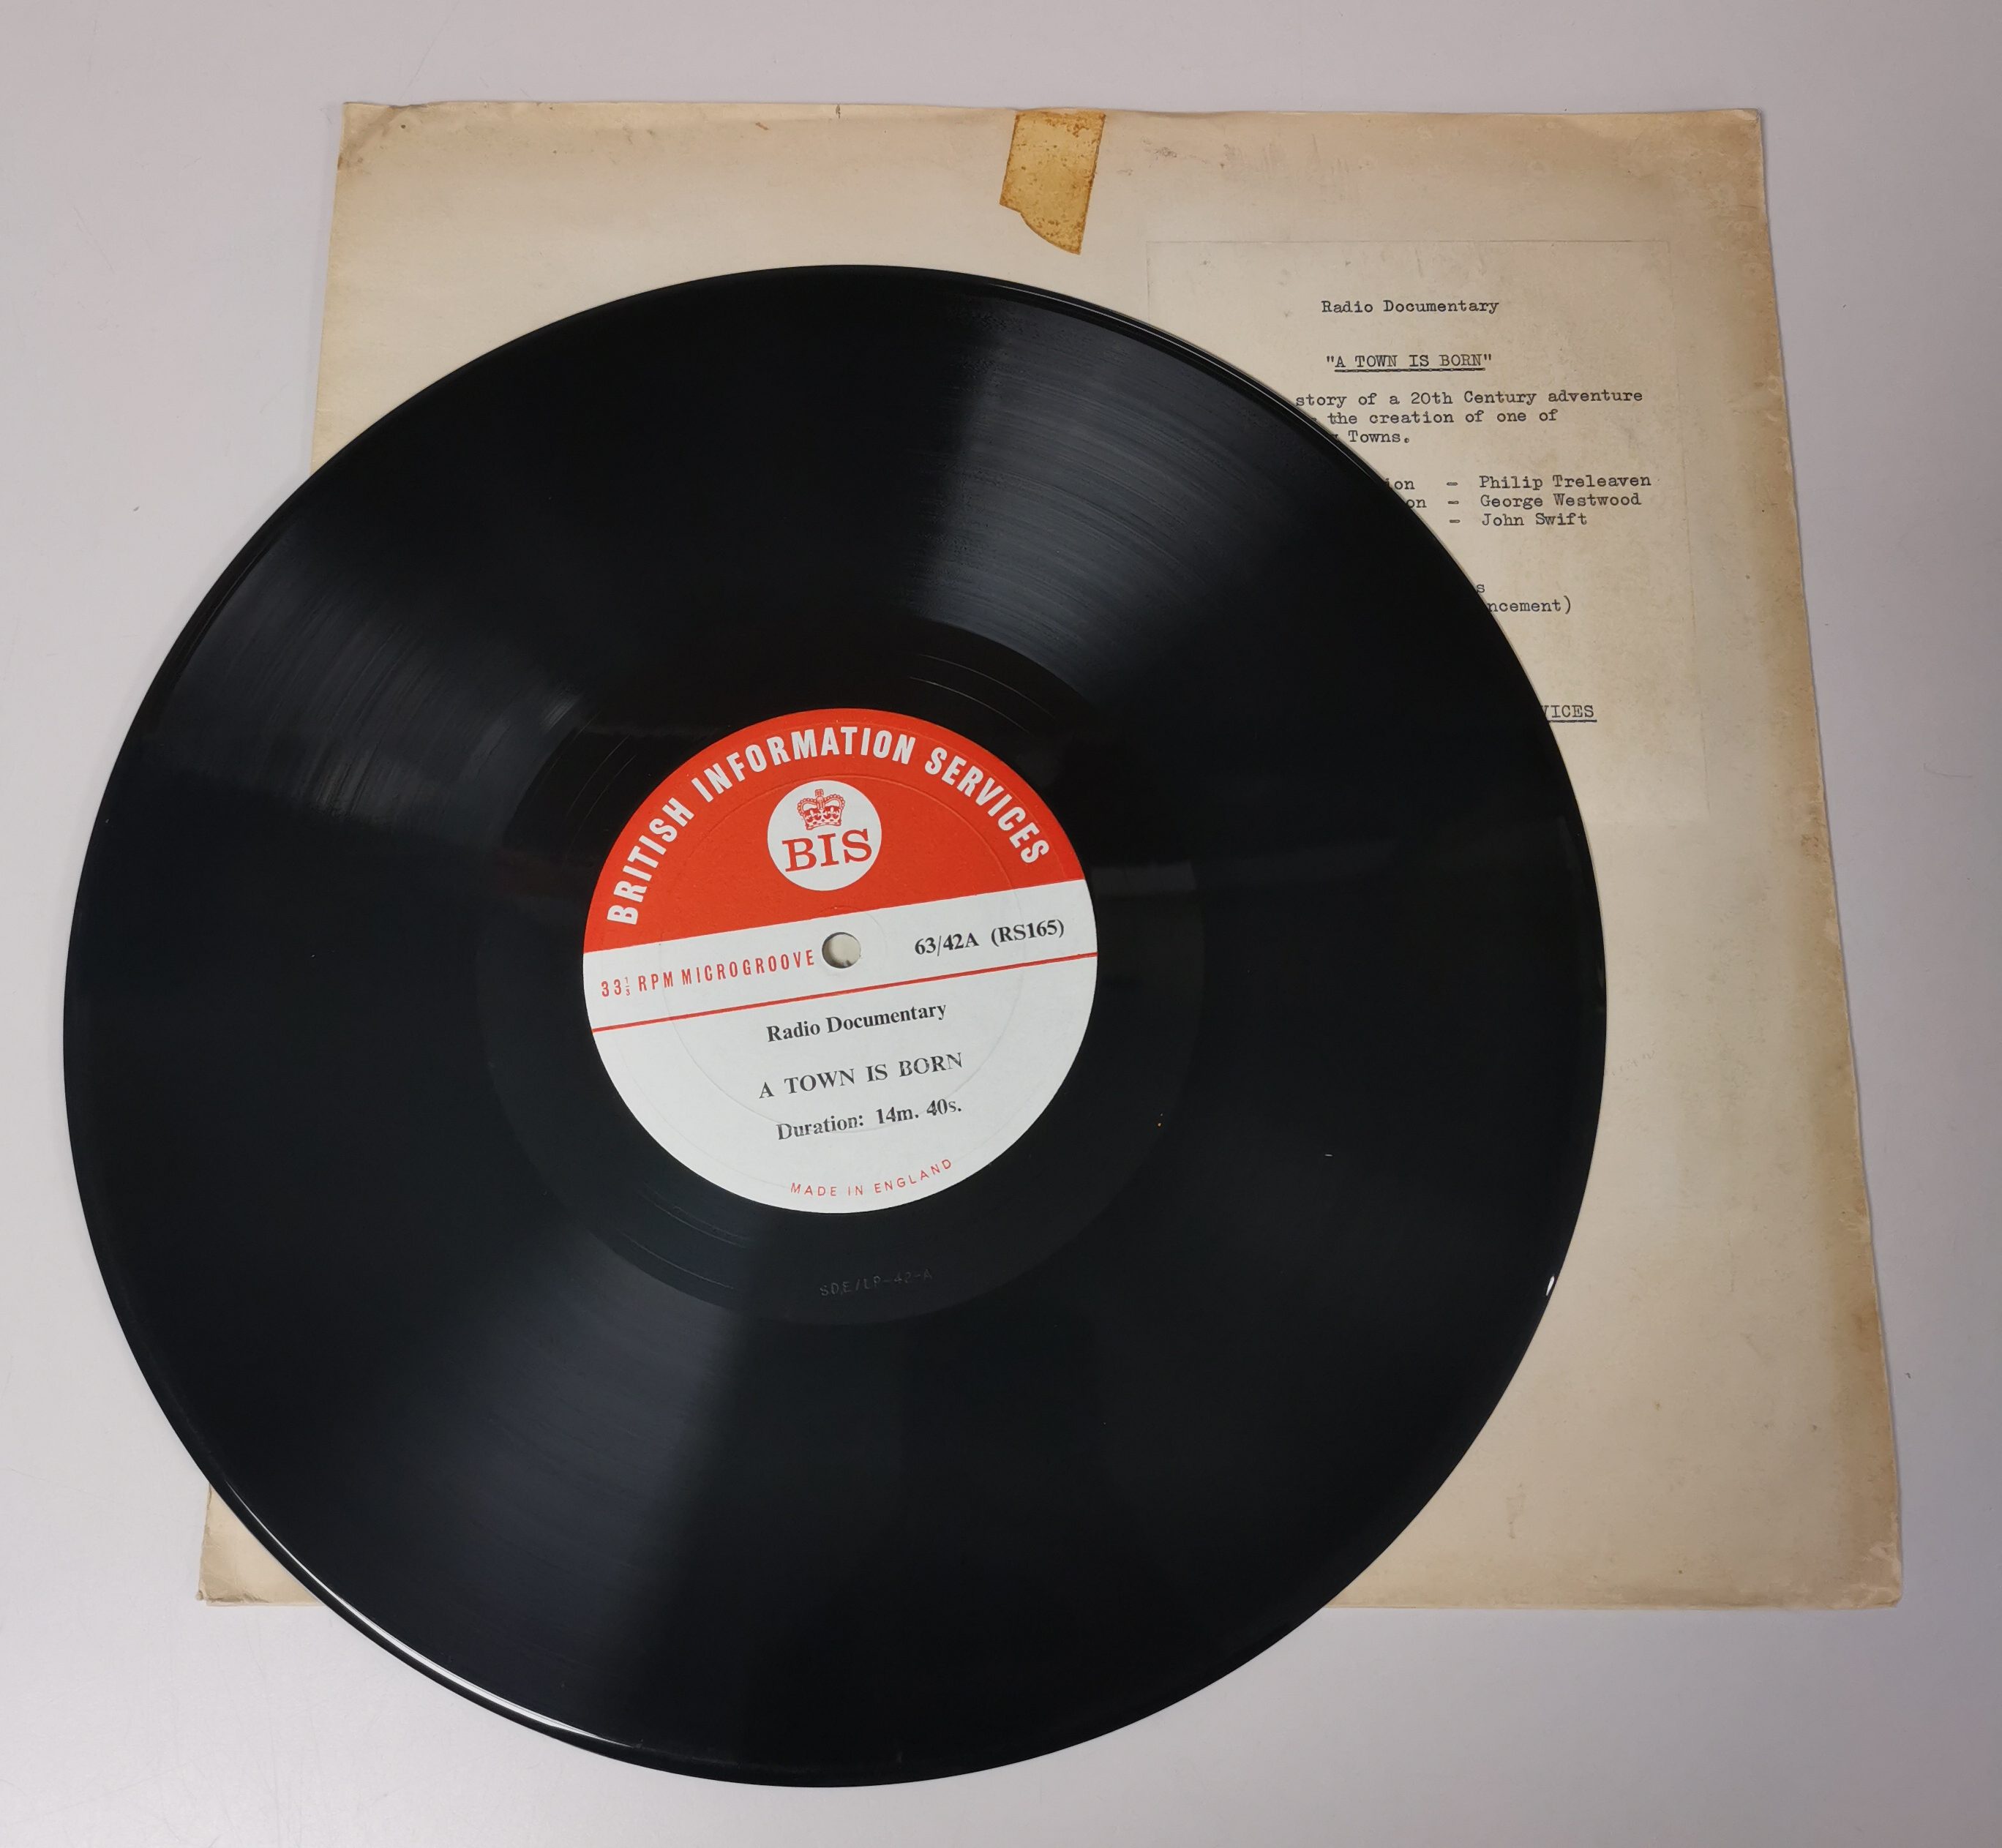 Photograph from above of vinyl disc, with red 'British Information Services' label. Laid on top of yellowed disc sleeve on white surface.